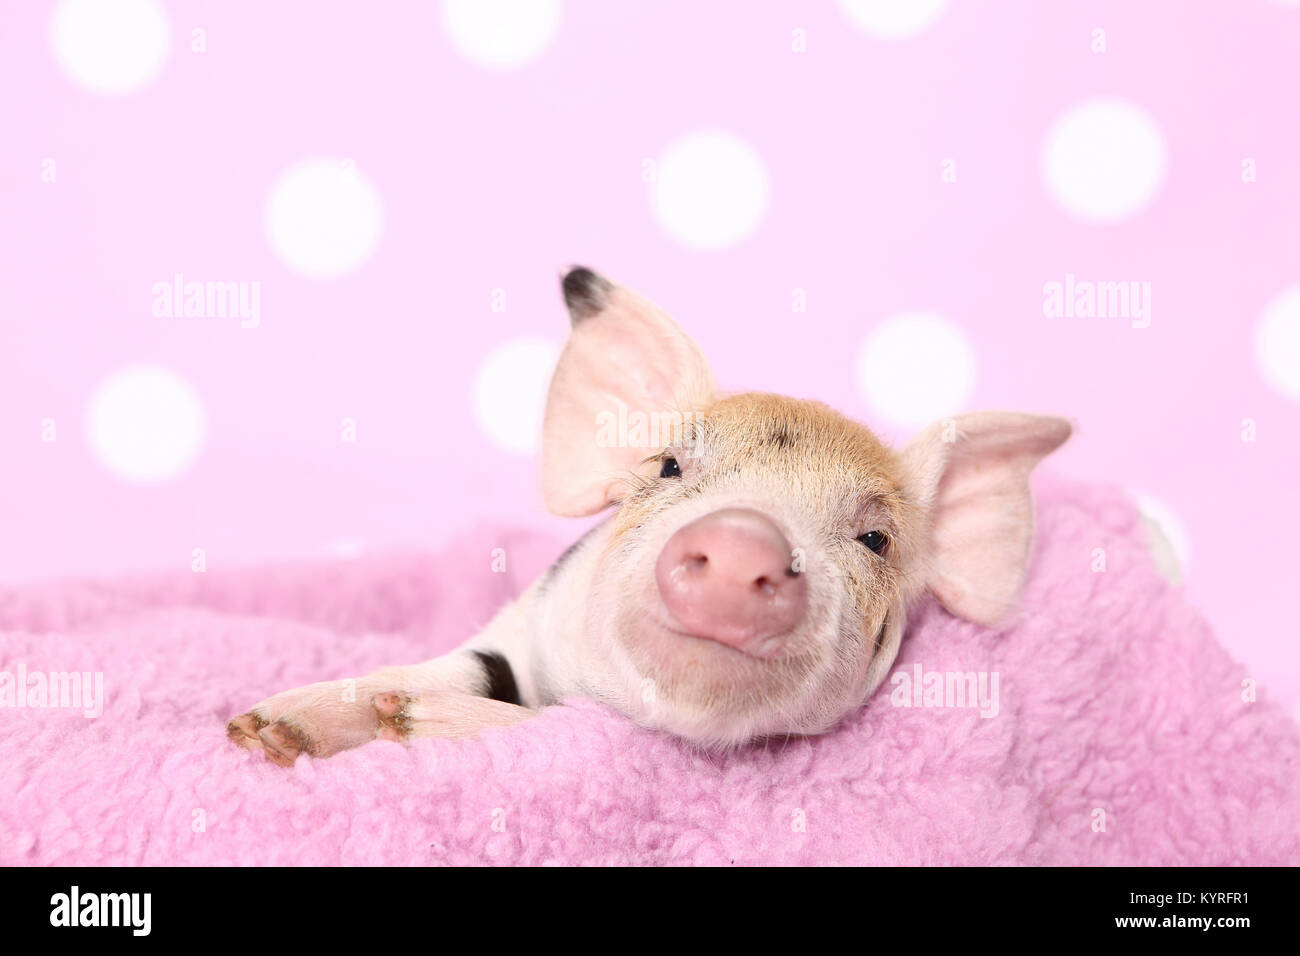 Domestic Pig, Turopolje x ?. Piglet (2 weeks old) lying on a pink blanket. Studio picture seen against a pink background with polka dots. Germany Stock Photo